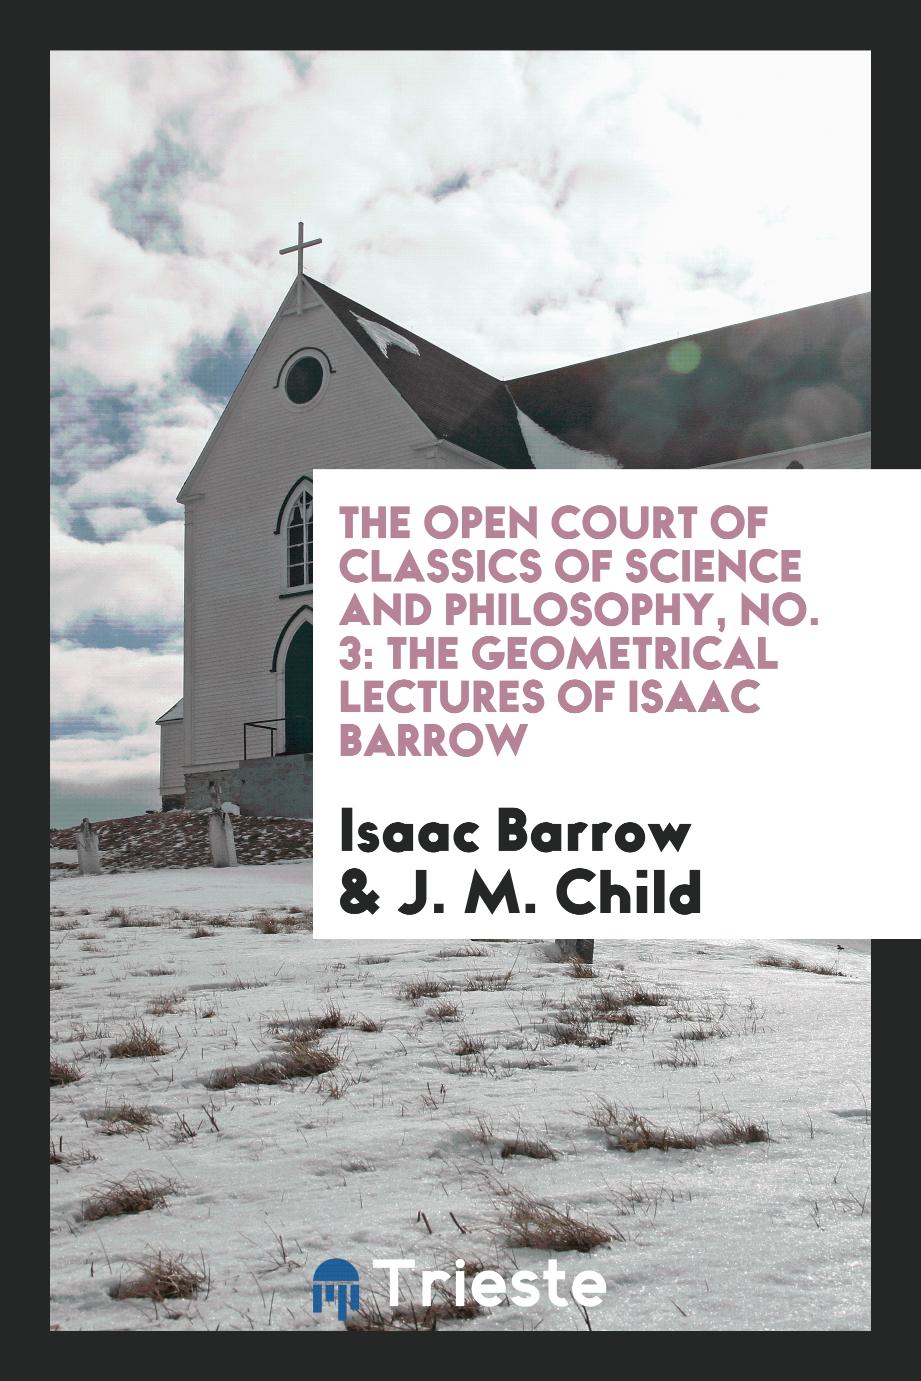 The Open Court of Classics of Science and Philosophy, No. 3: The Geometrical Lectures of Isaac Barrow